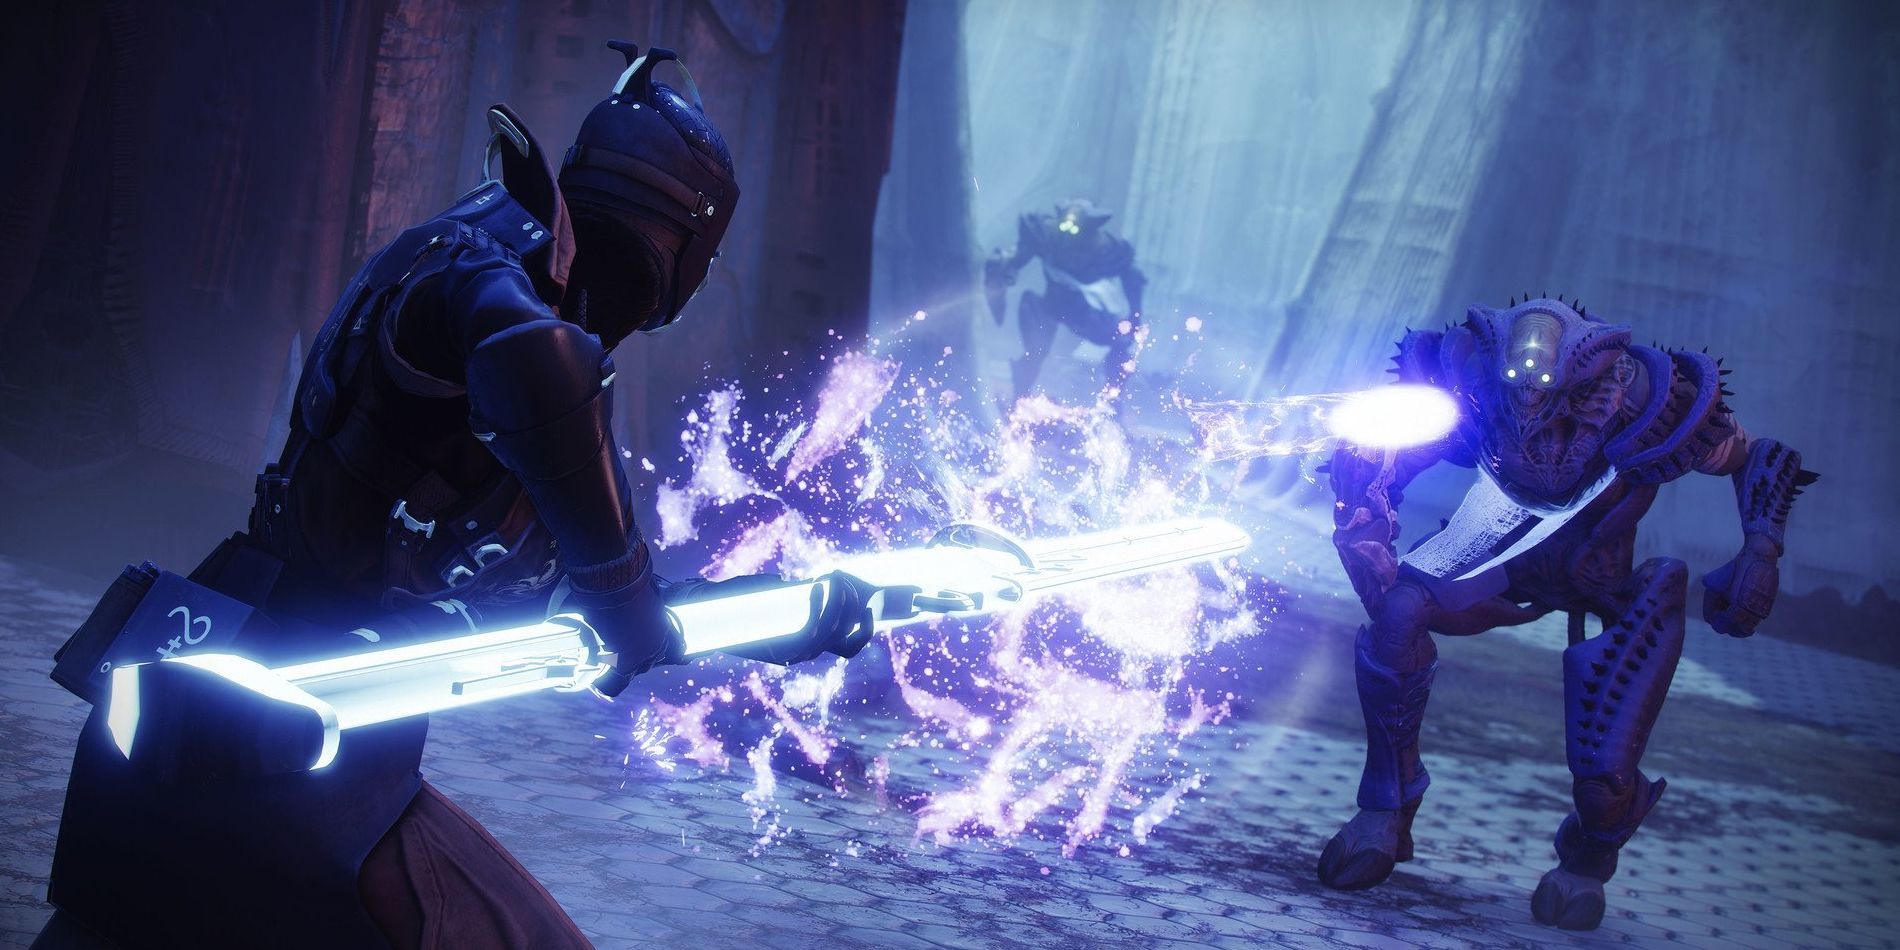 A guardian attacks two Hive using the new glaive weapon in Destiny 2